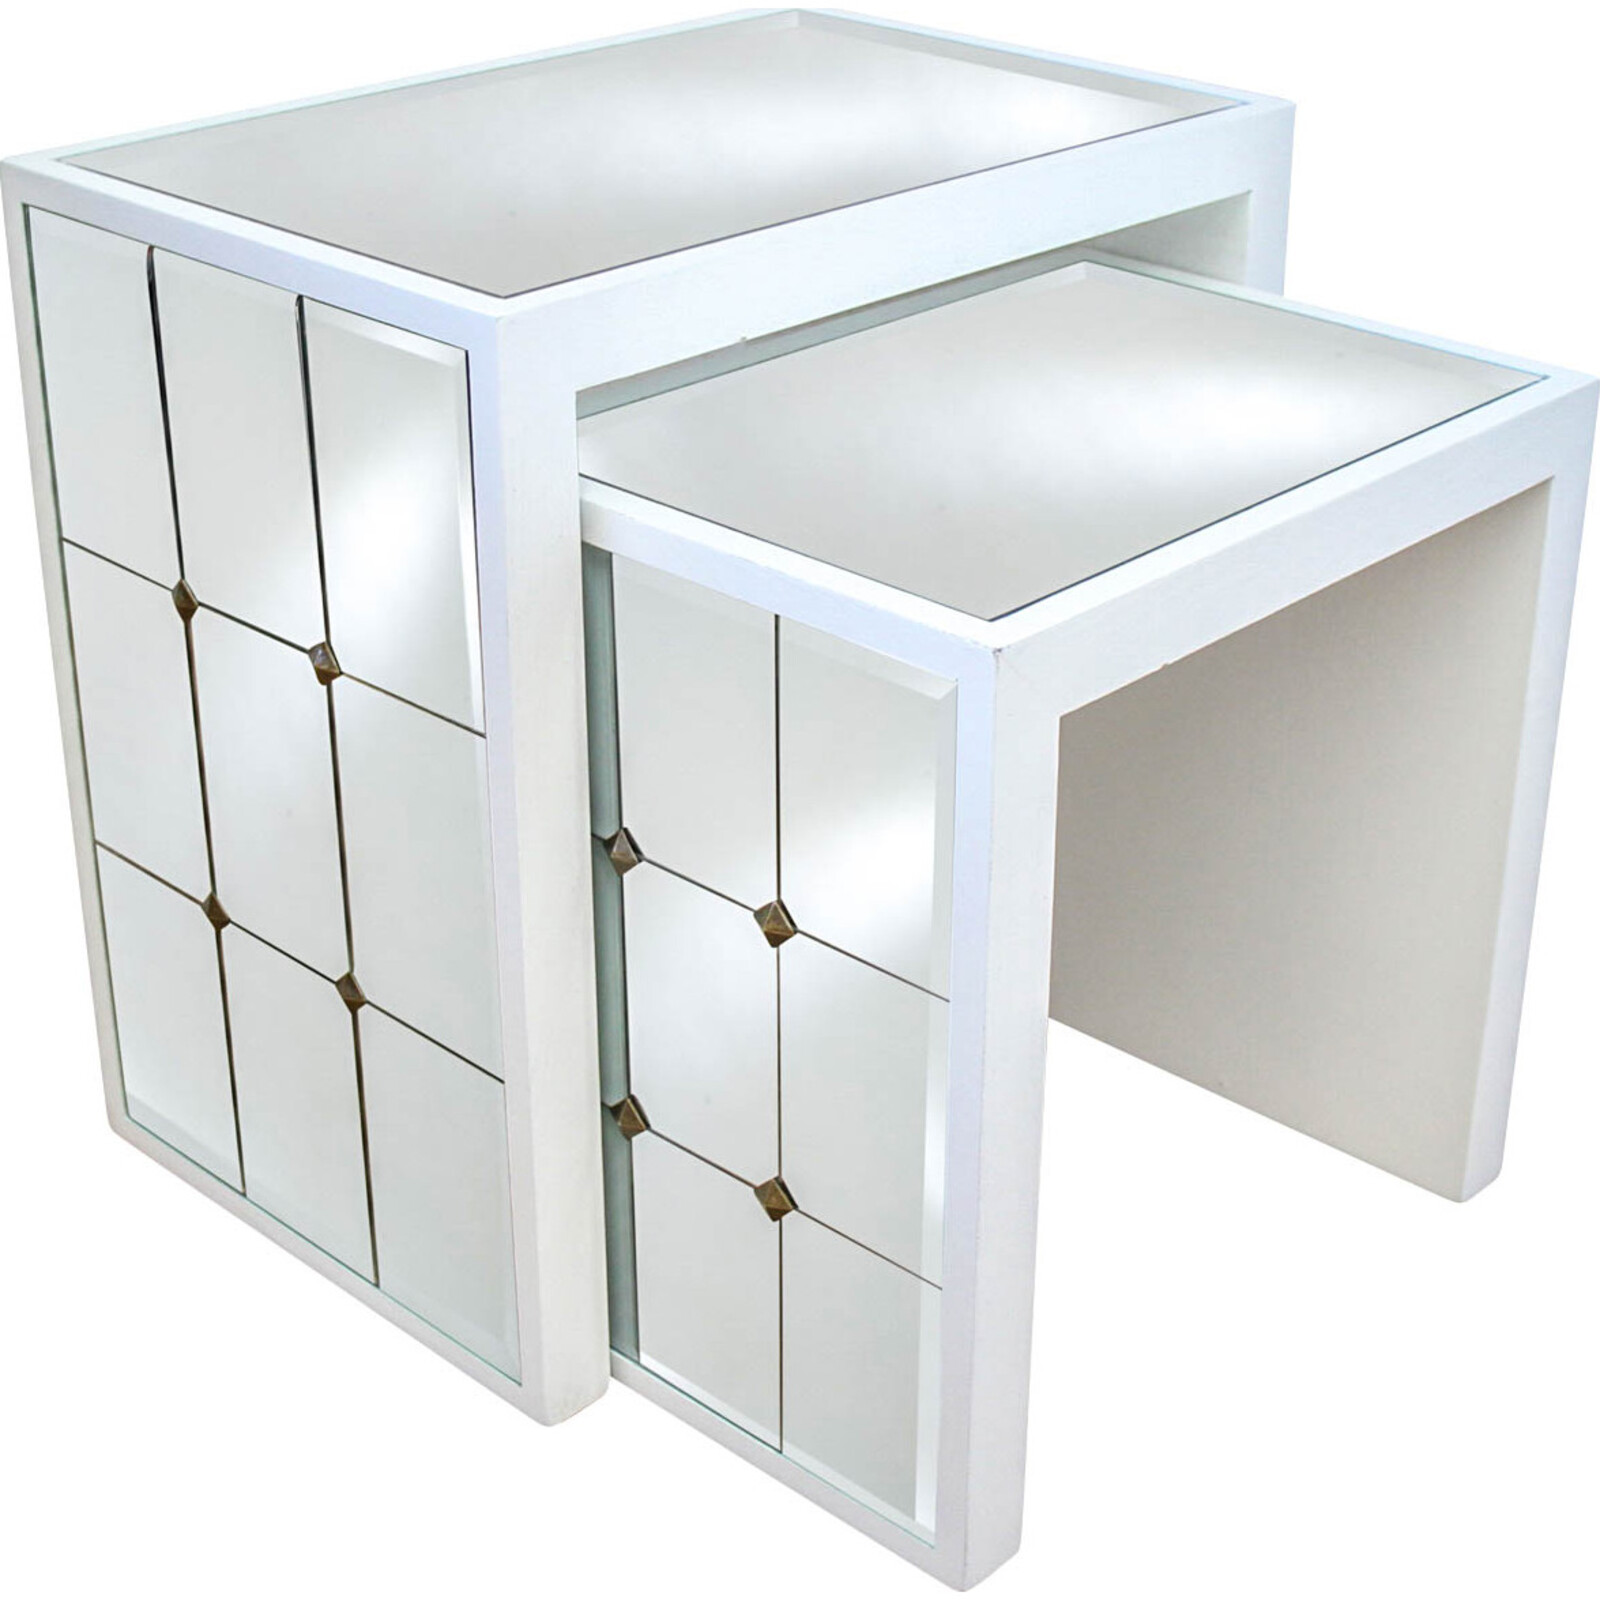 # Side Table S/2 Mirrored Cheval